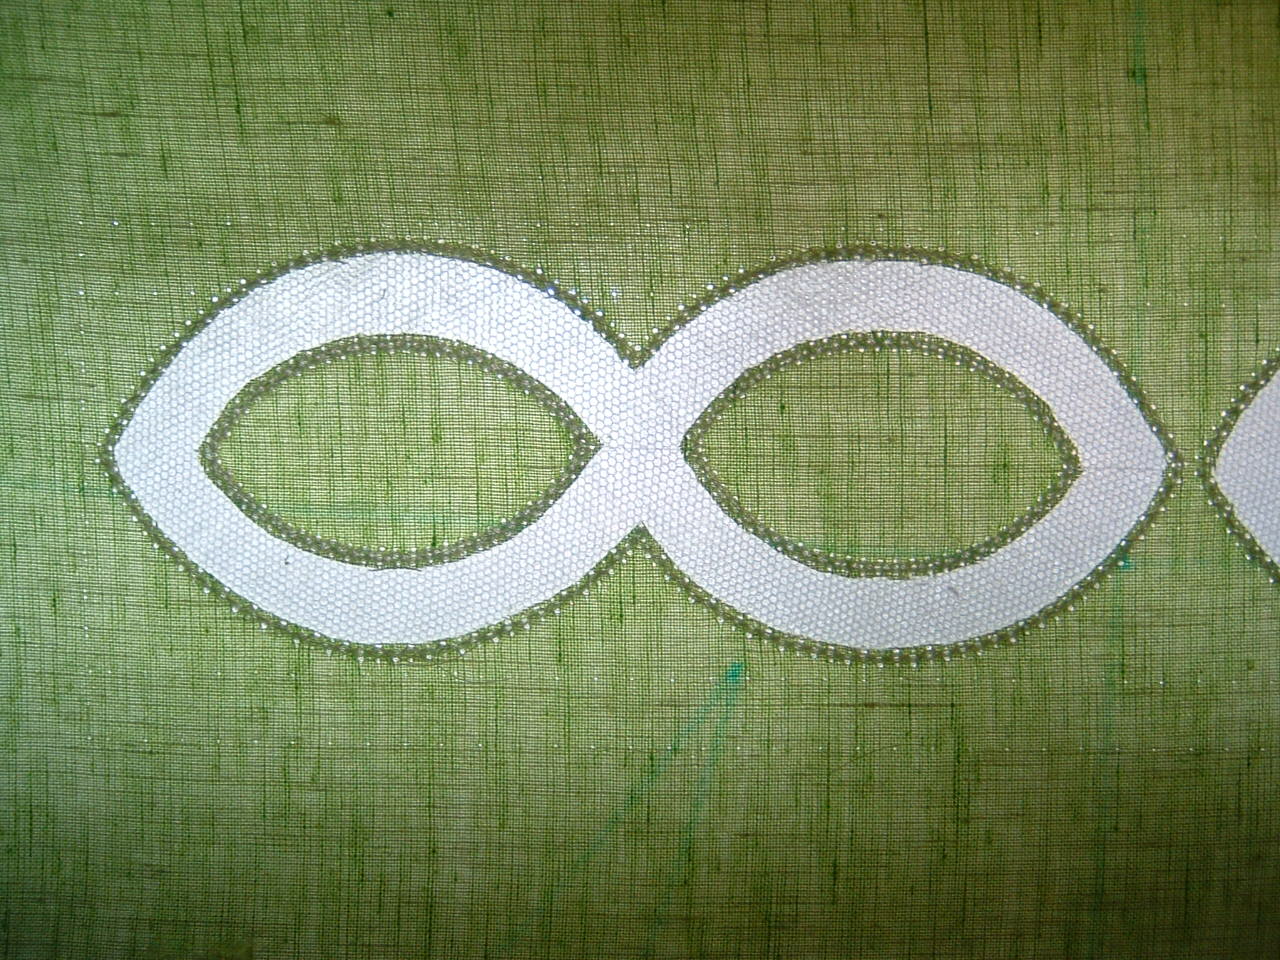 Machine Embroidery In the Hoop